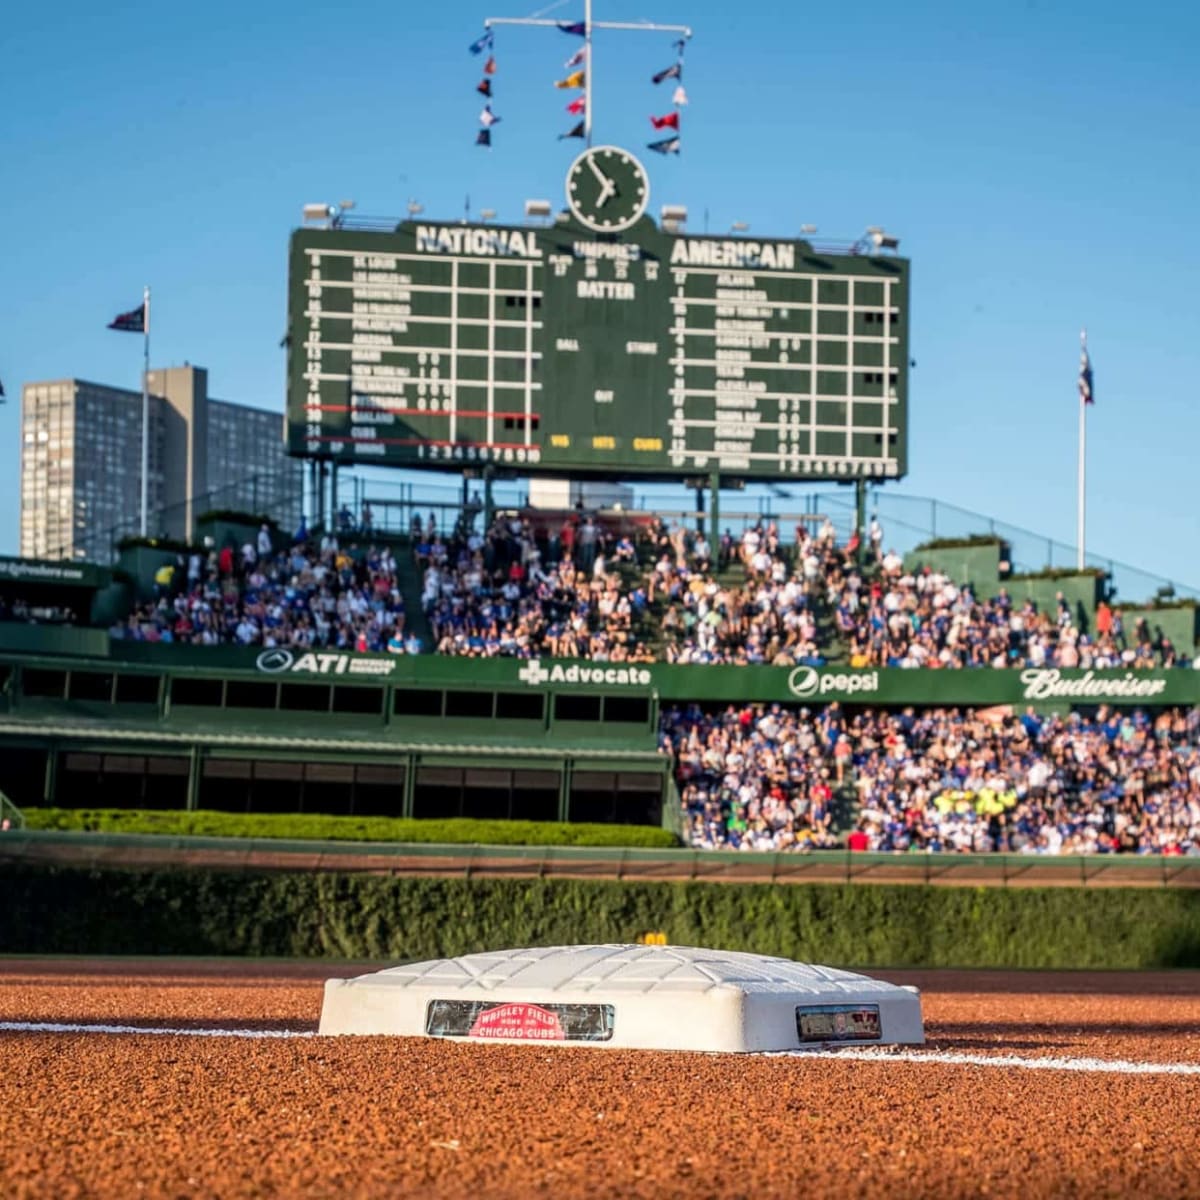 MLB 2023: There's a new buzz around the Chicago Cubs at Wrigley Field -  Chicago Sun-Times